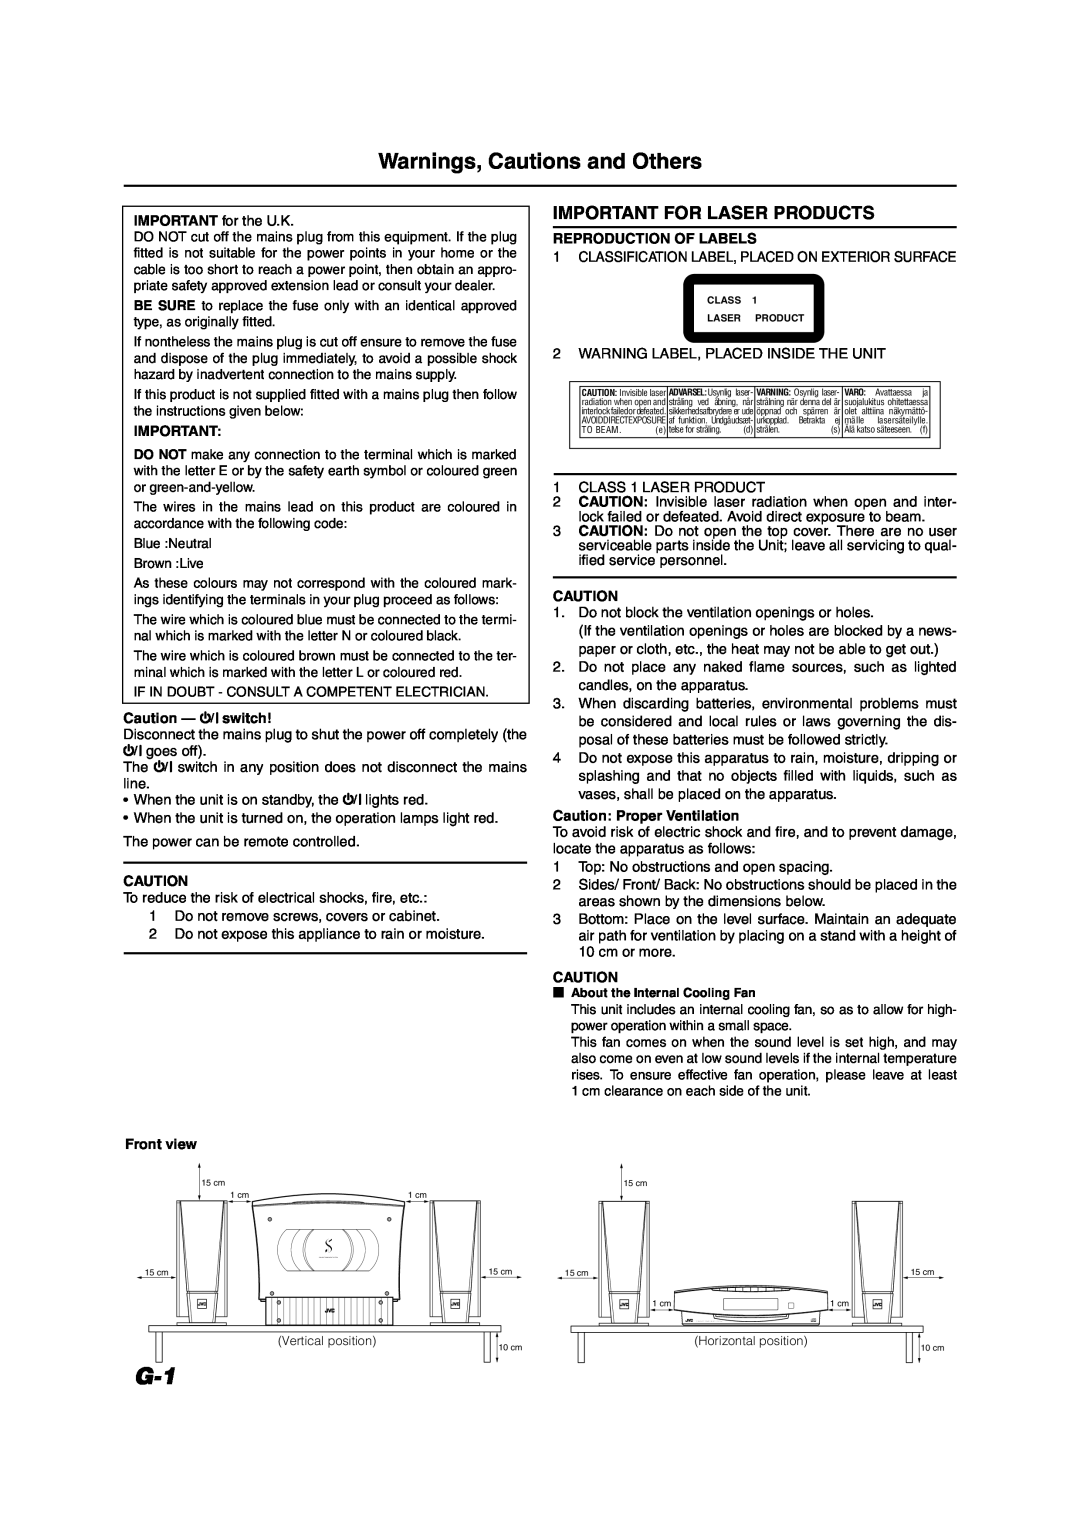 JVC LVT0853-009B, P-VSDT6 manual Warnings, Cautions and Others 